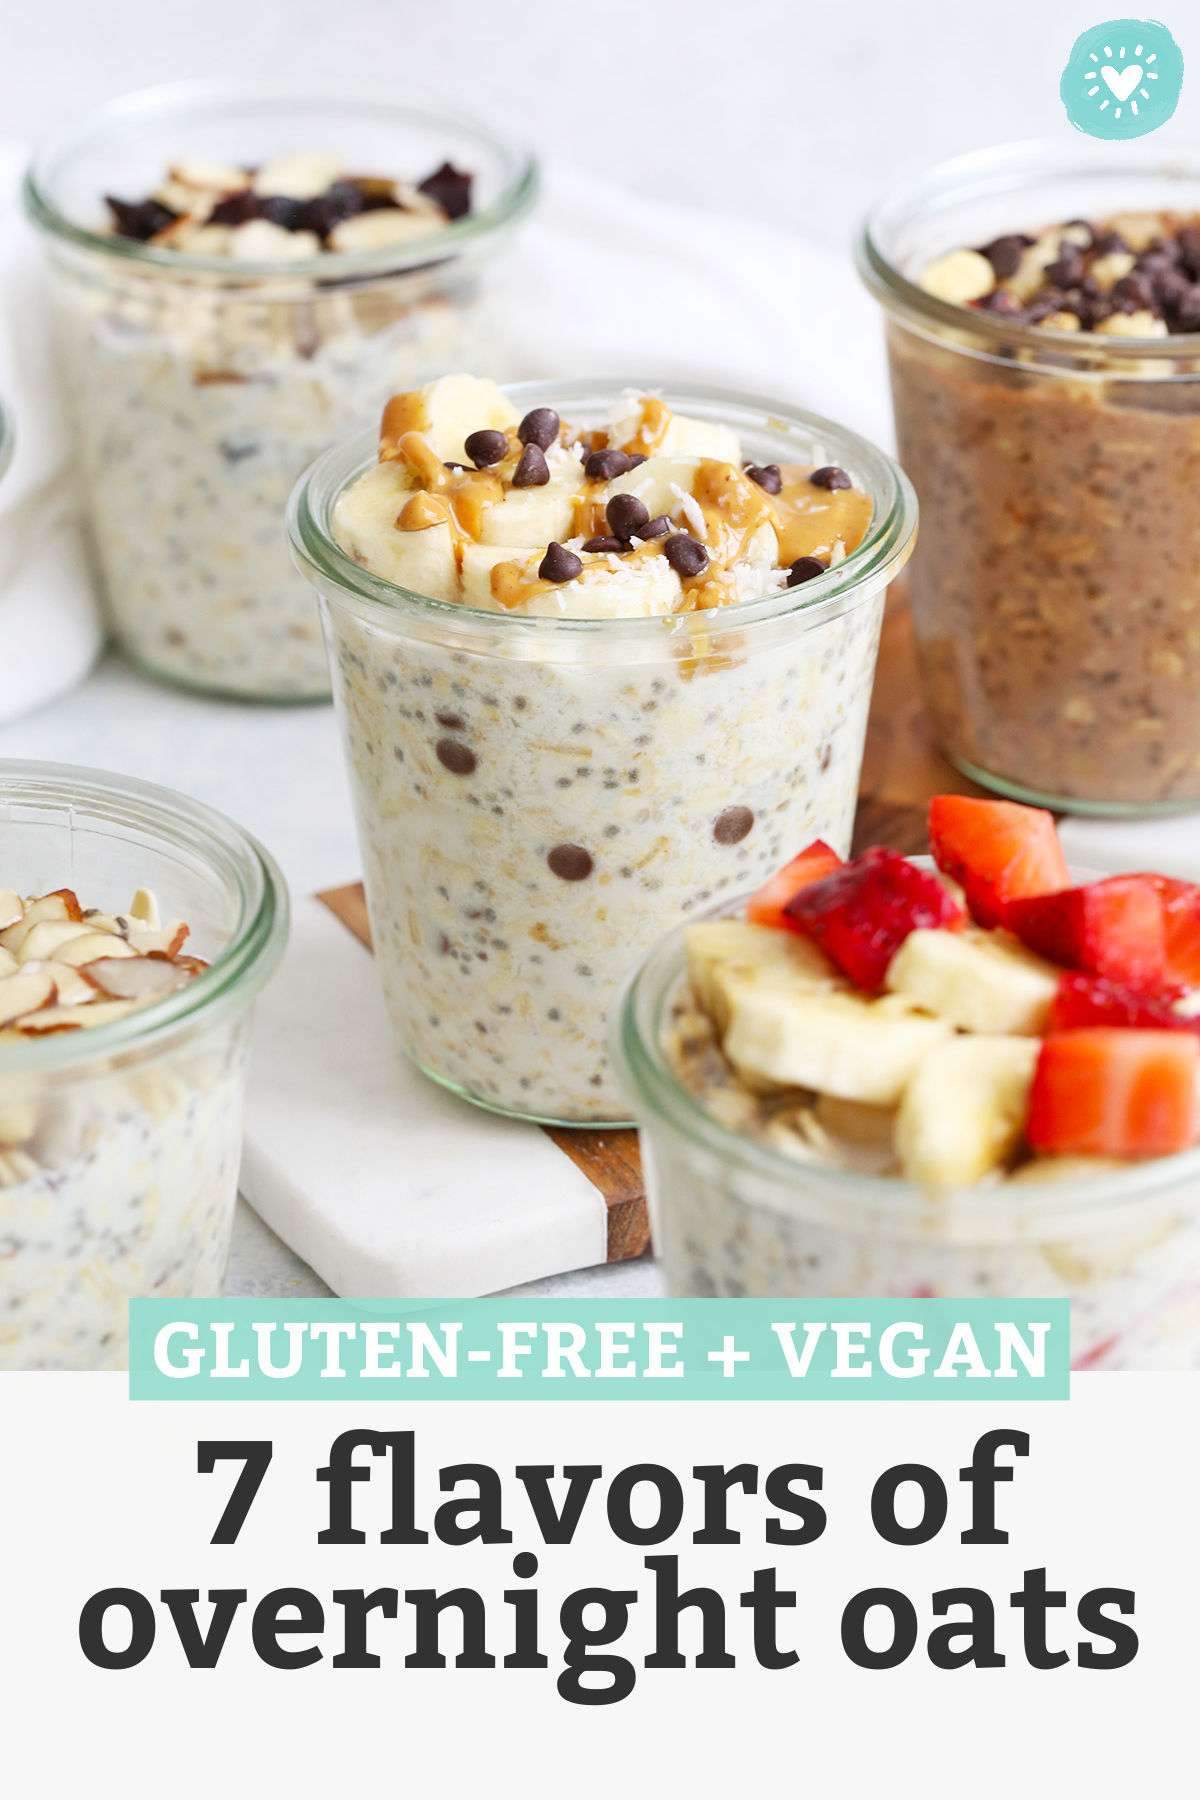 How to Make Overnight Oats + 7 Flavors of Overnight Oats to try! This easy meal prep breakfast is always a hit. (Gluten-free, Vegan) // Meal Prep Breakfast // Overnight Oats Recipe // Healthy Breakfast #glutenfree #overnightoats #oatmeal #dairyfree #healthybreakfast #mealprep #vegan